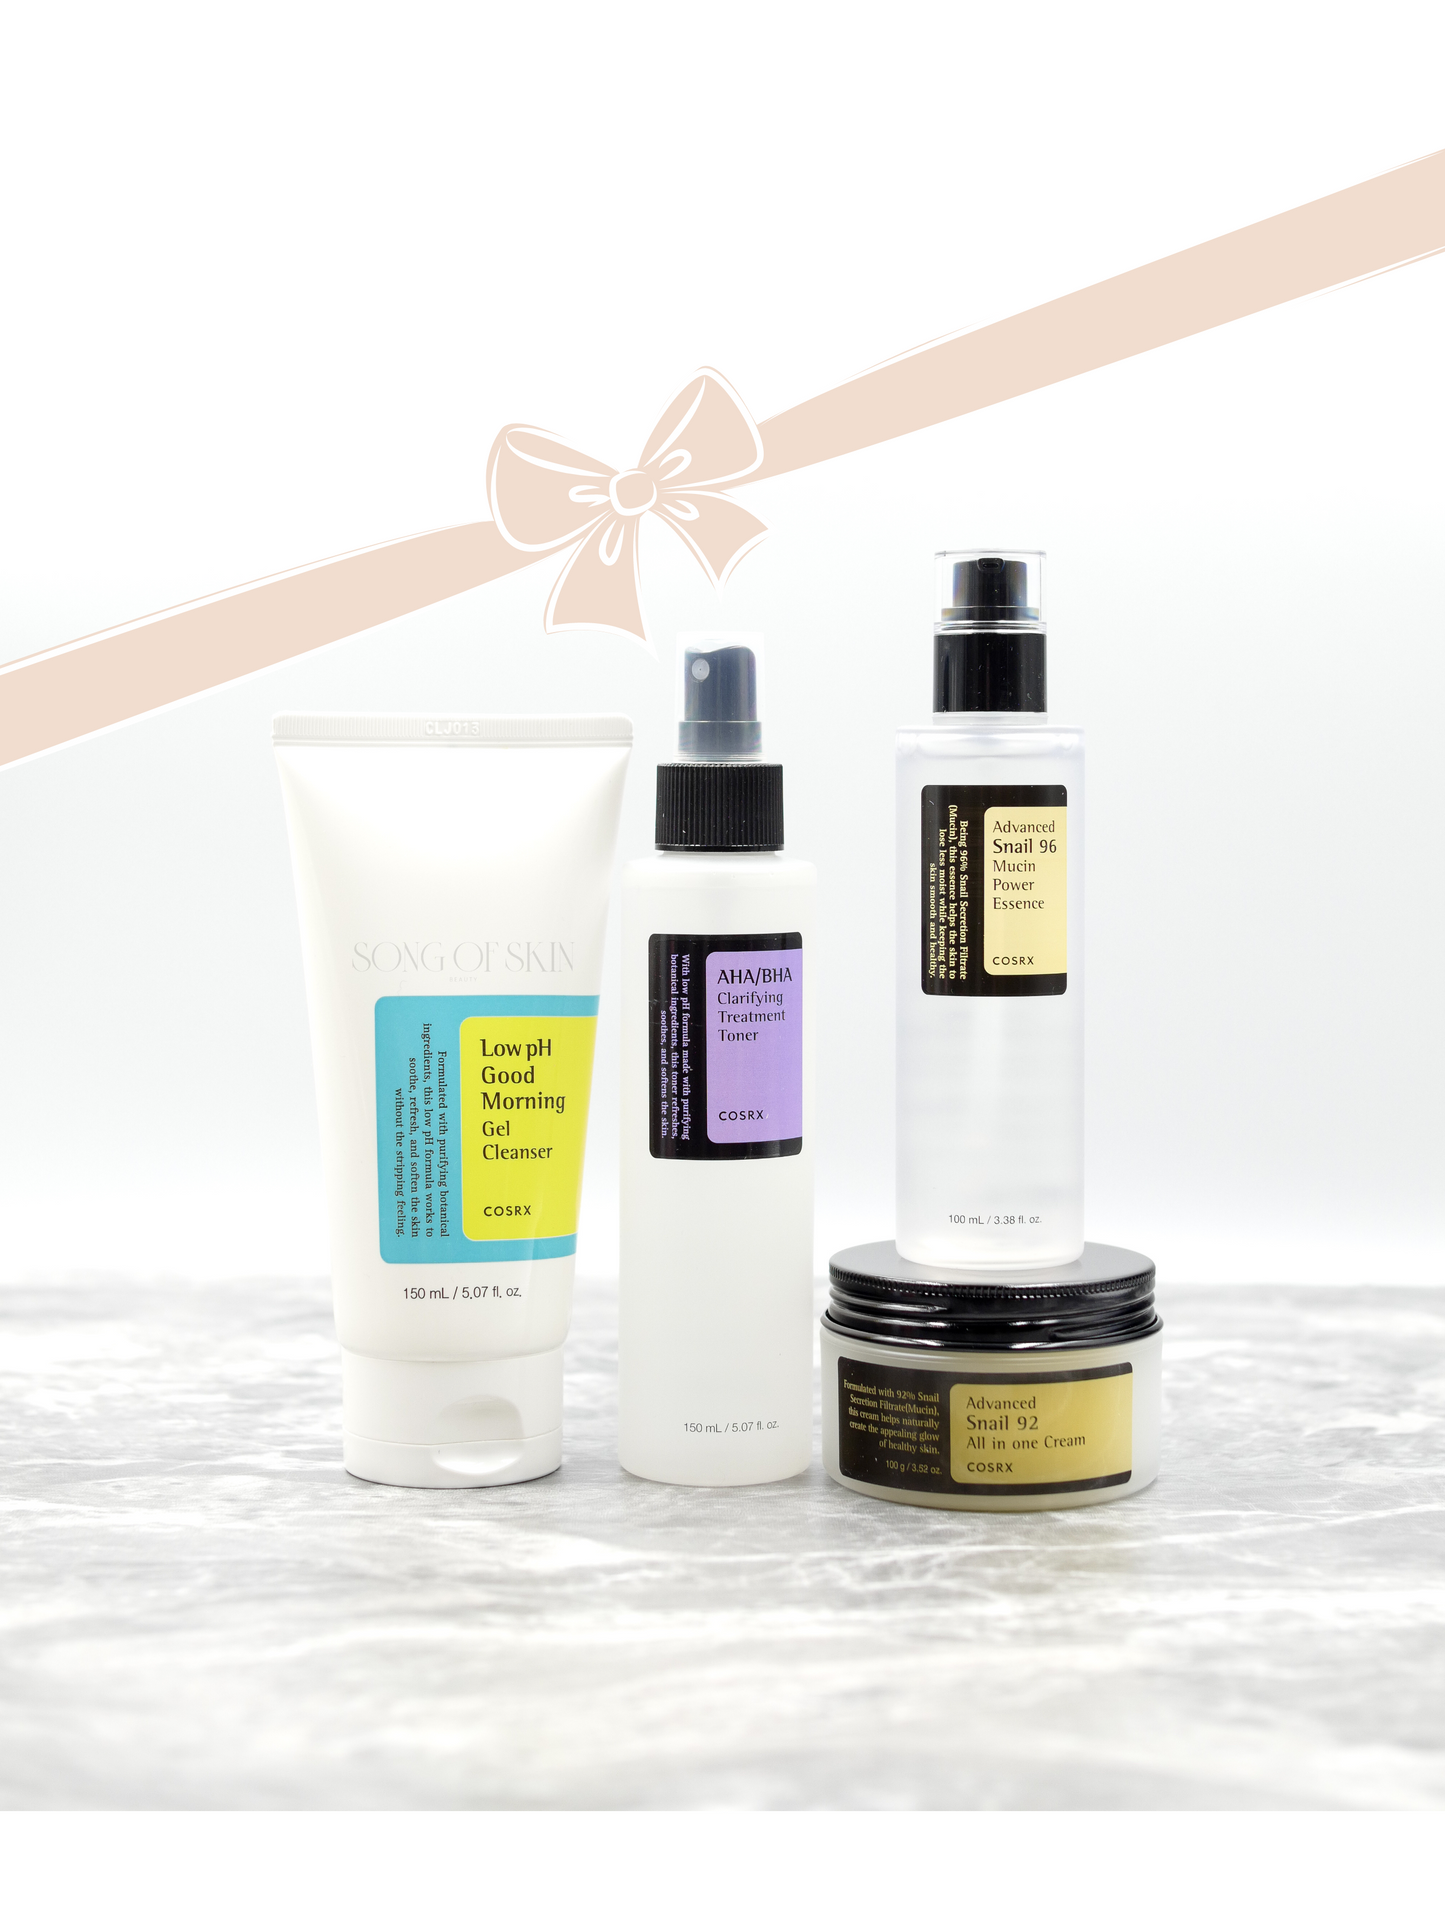 The Cosrx Clear Skin Gift Set